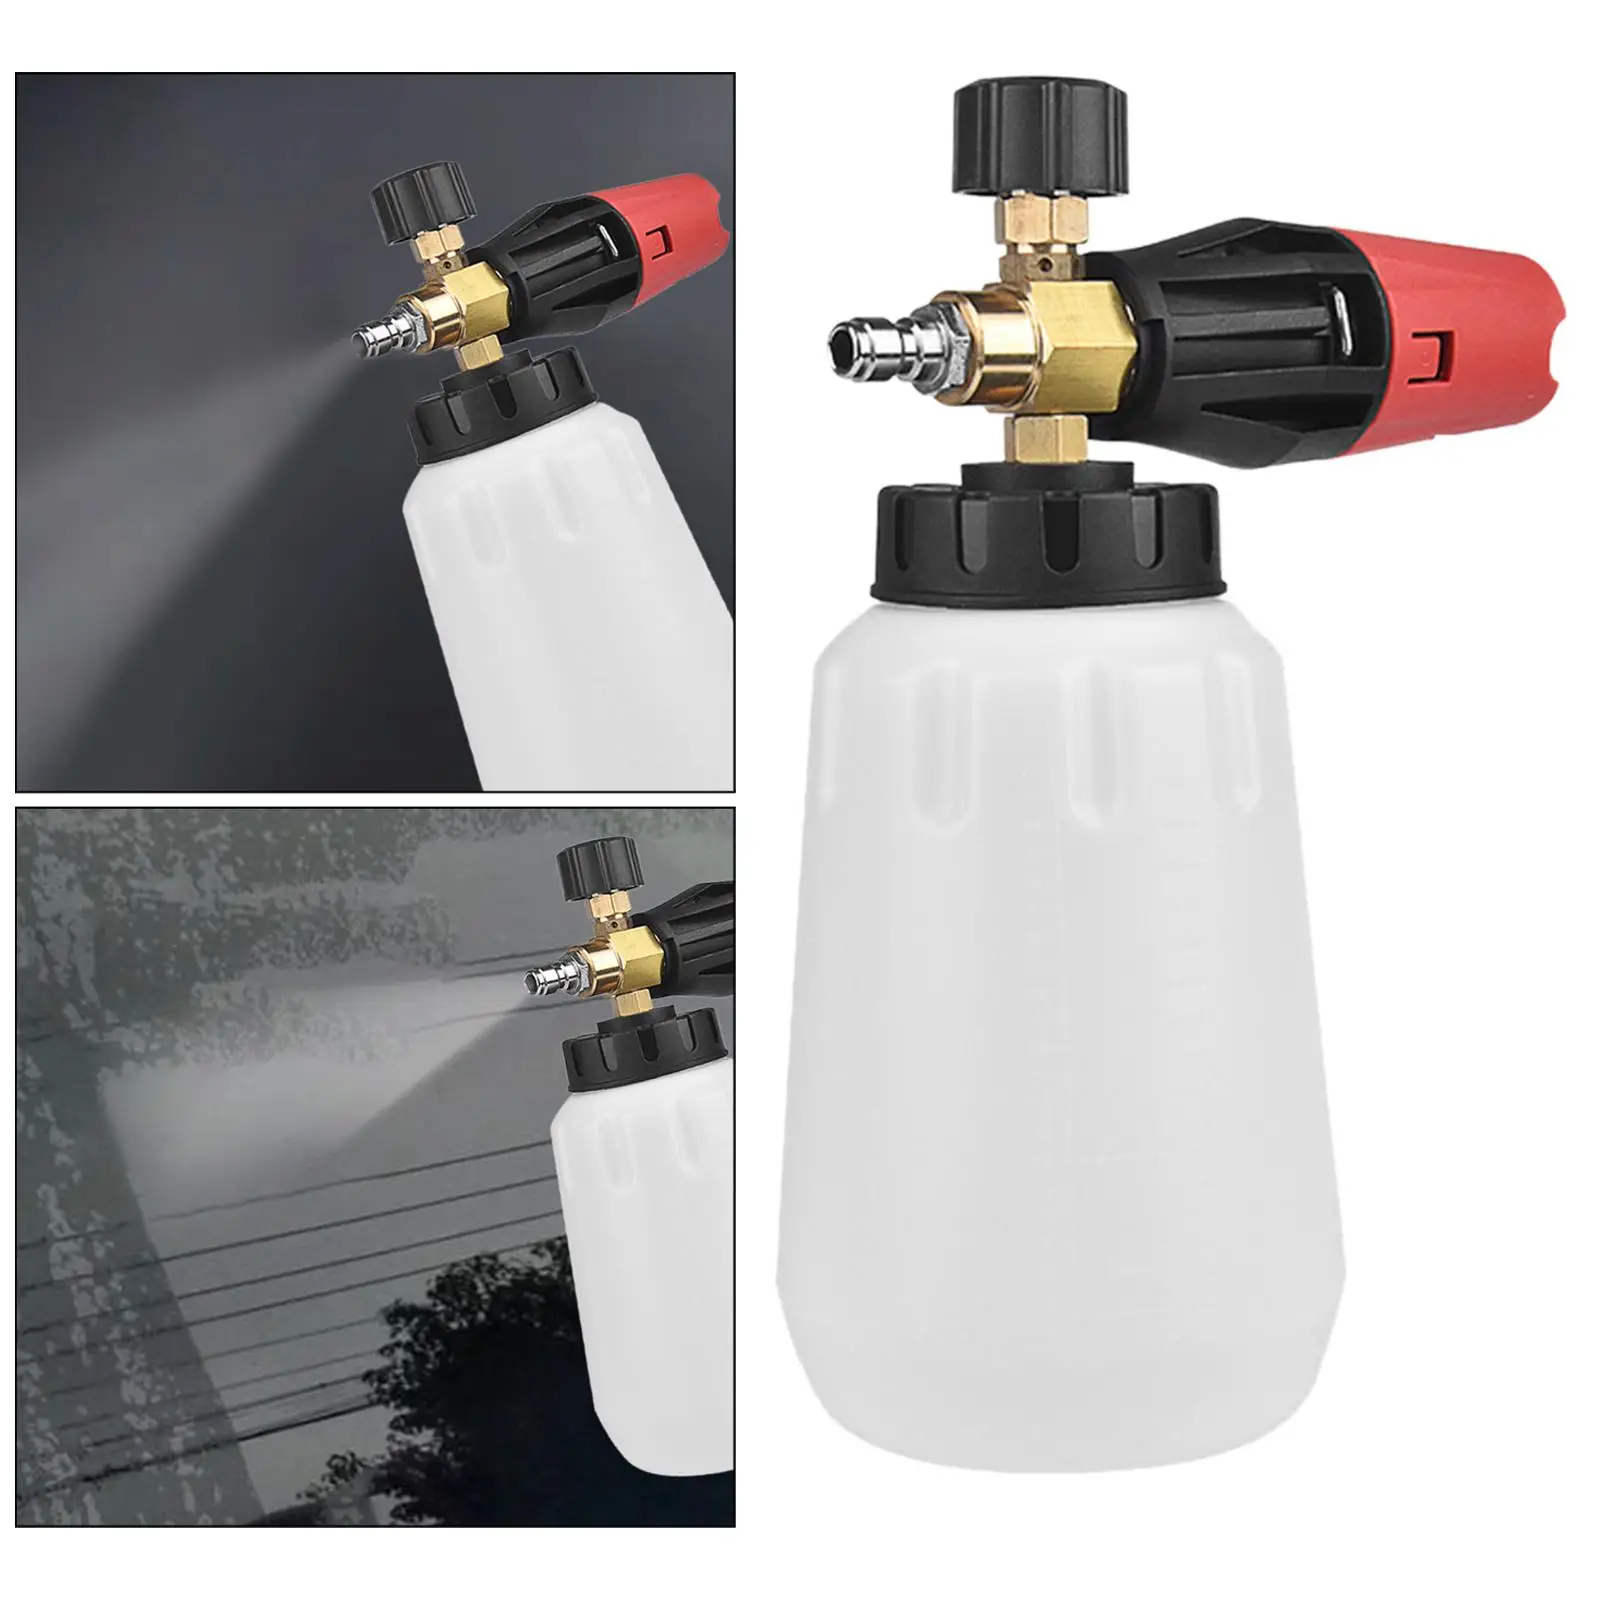 Professional Foaming Sprayer Quick Release Portable for Car Window Washing